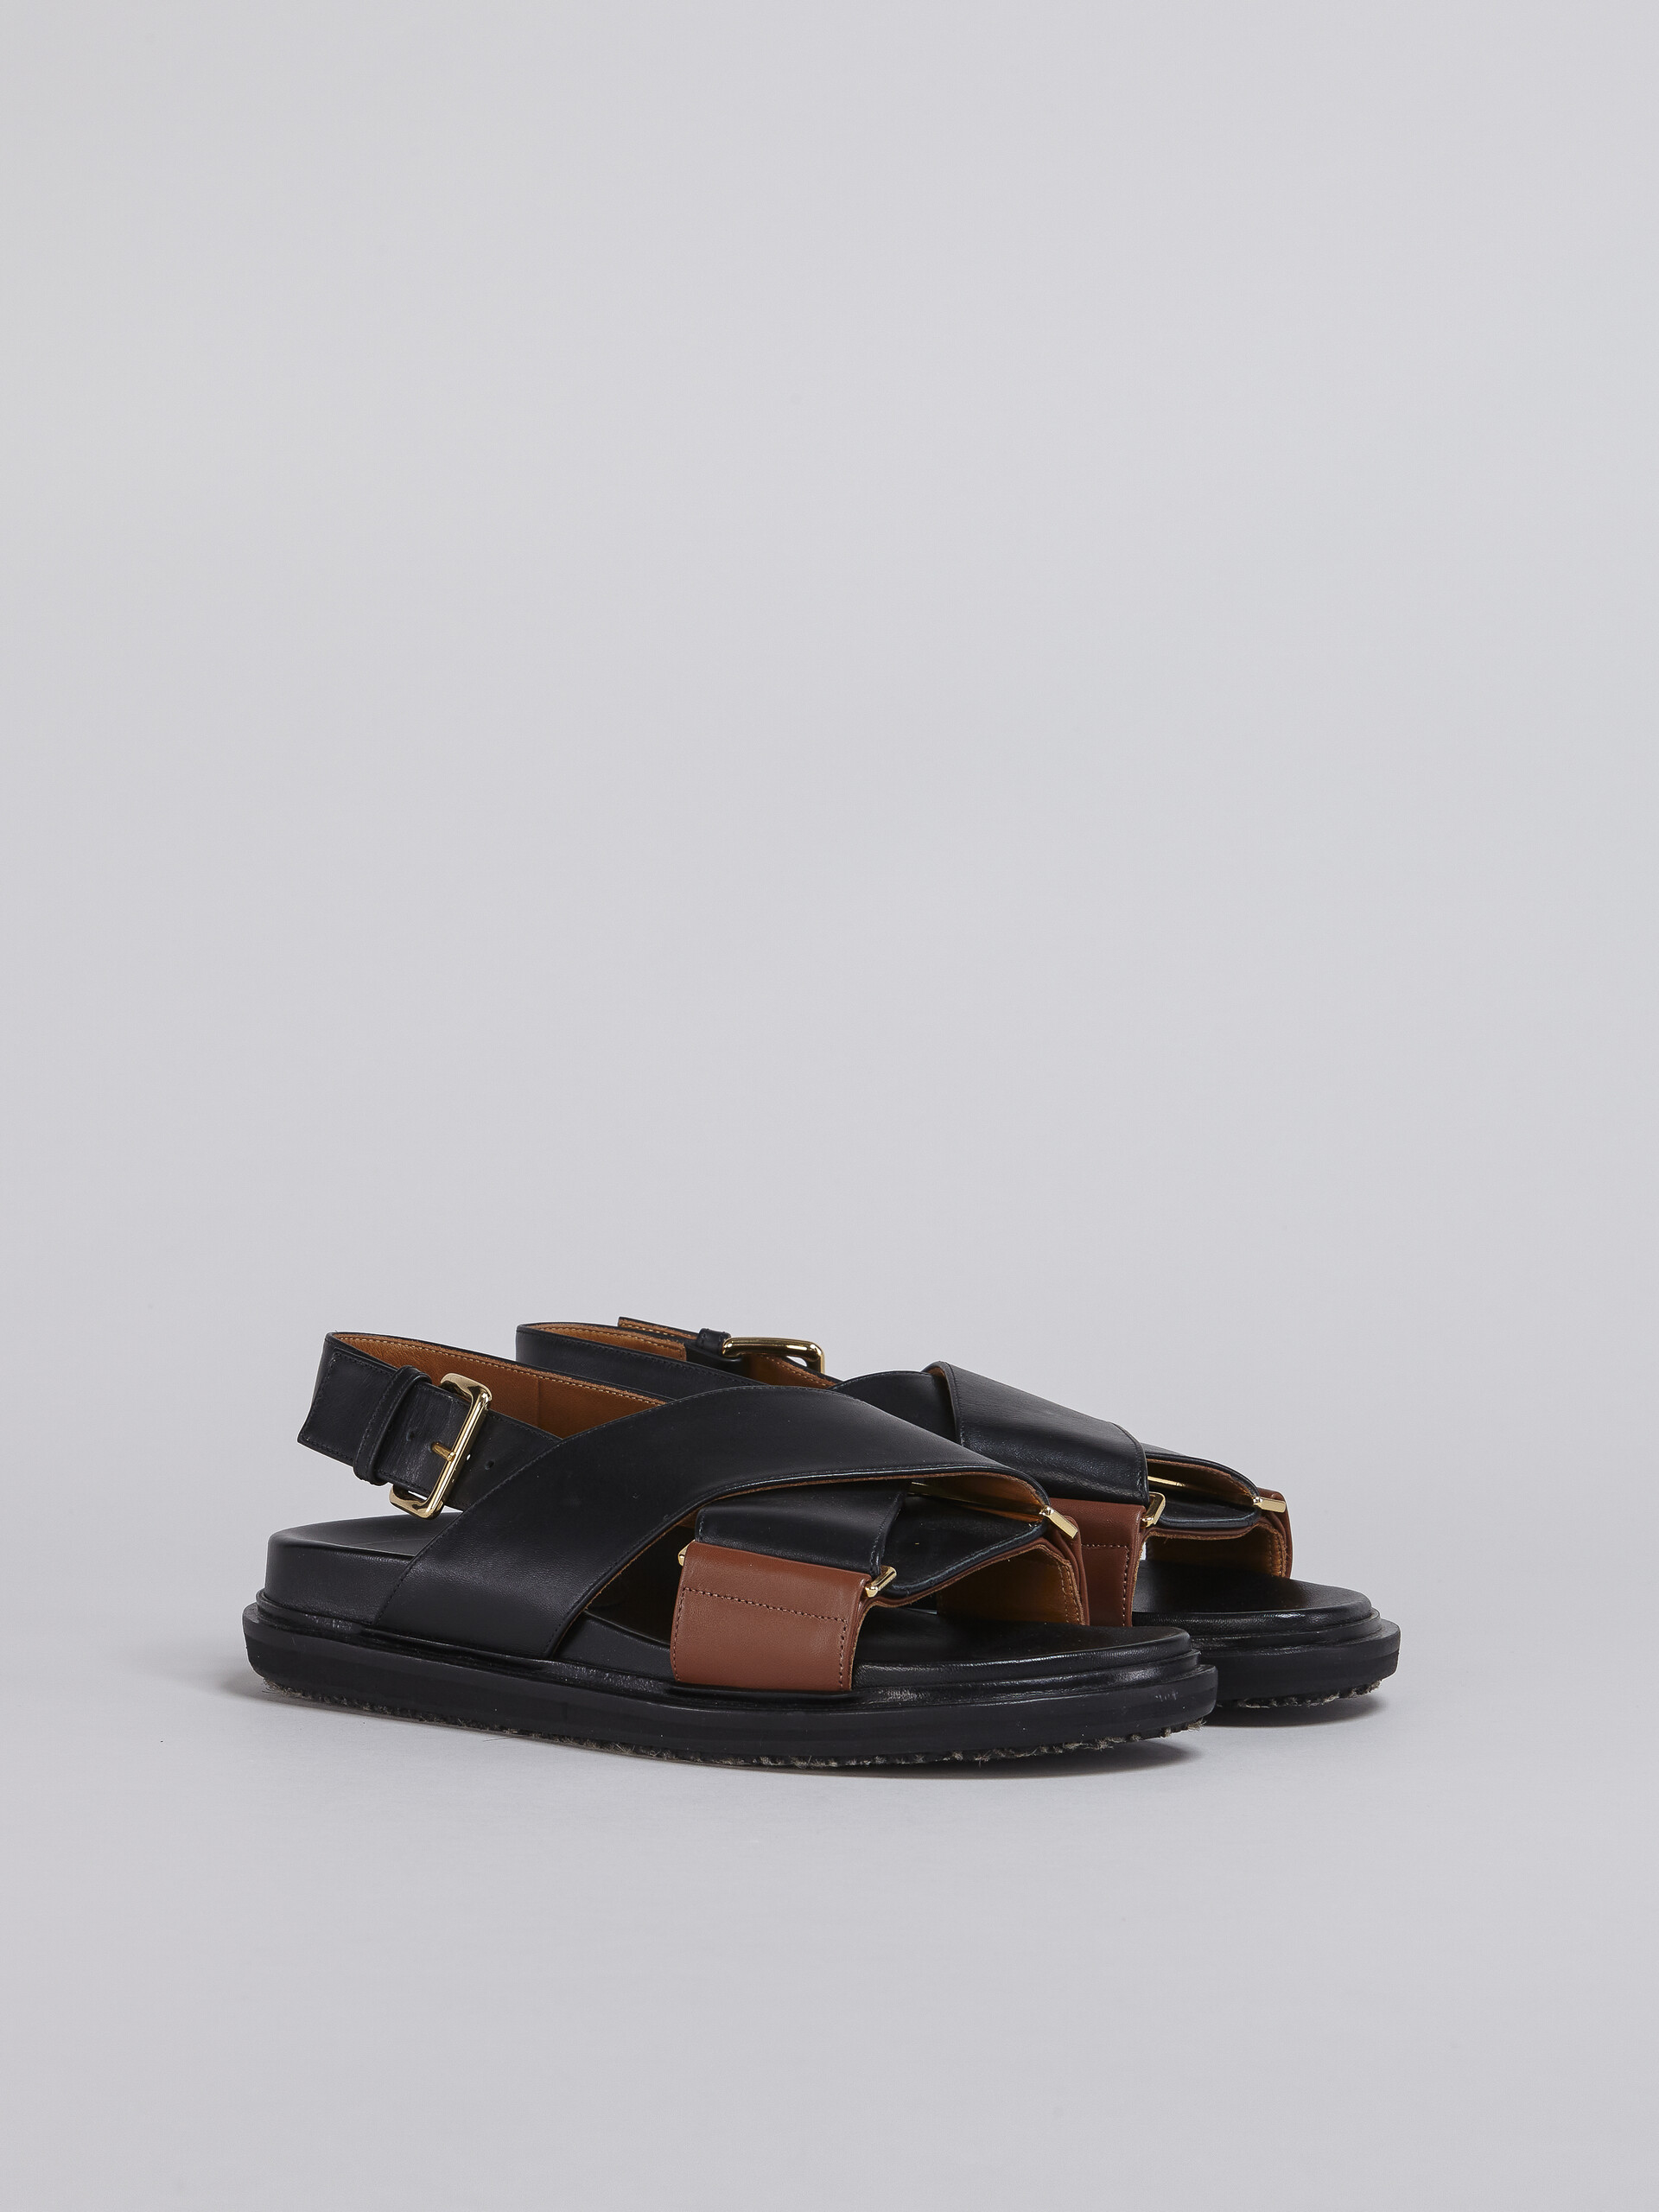 Black and brown smooth calf leather fussbett - Sandals - Image 2